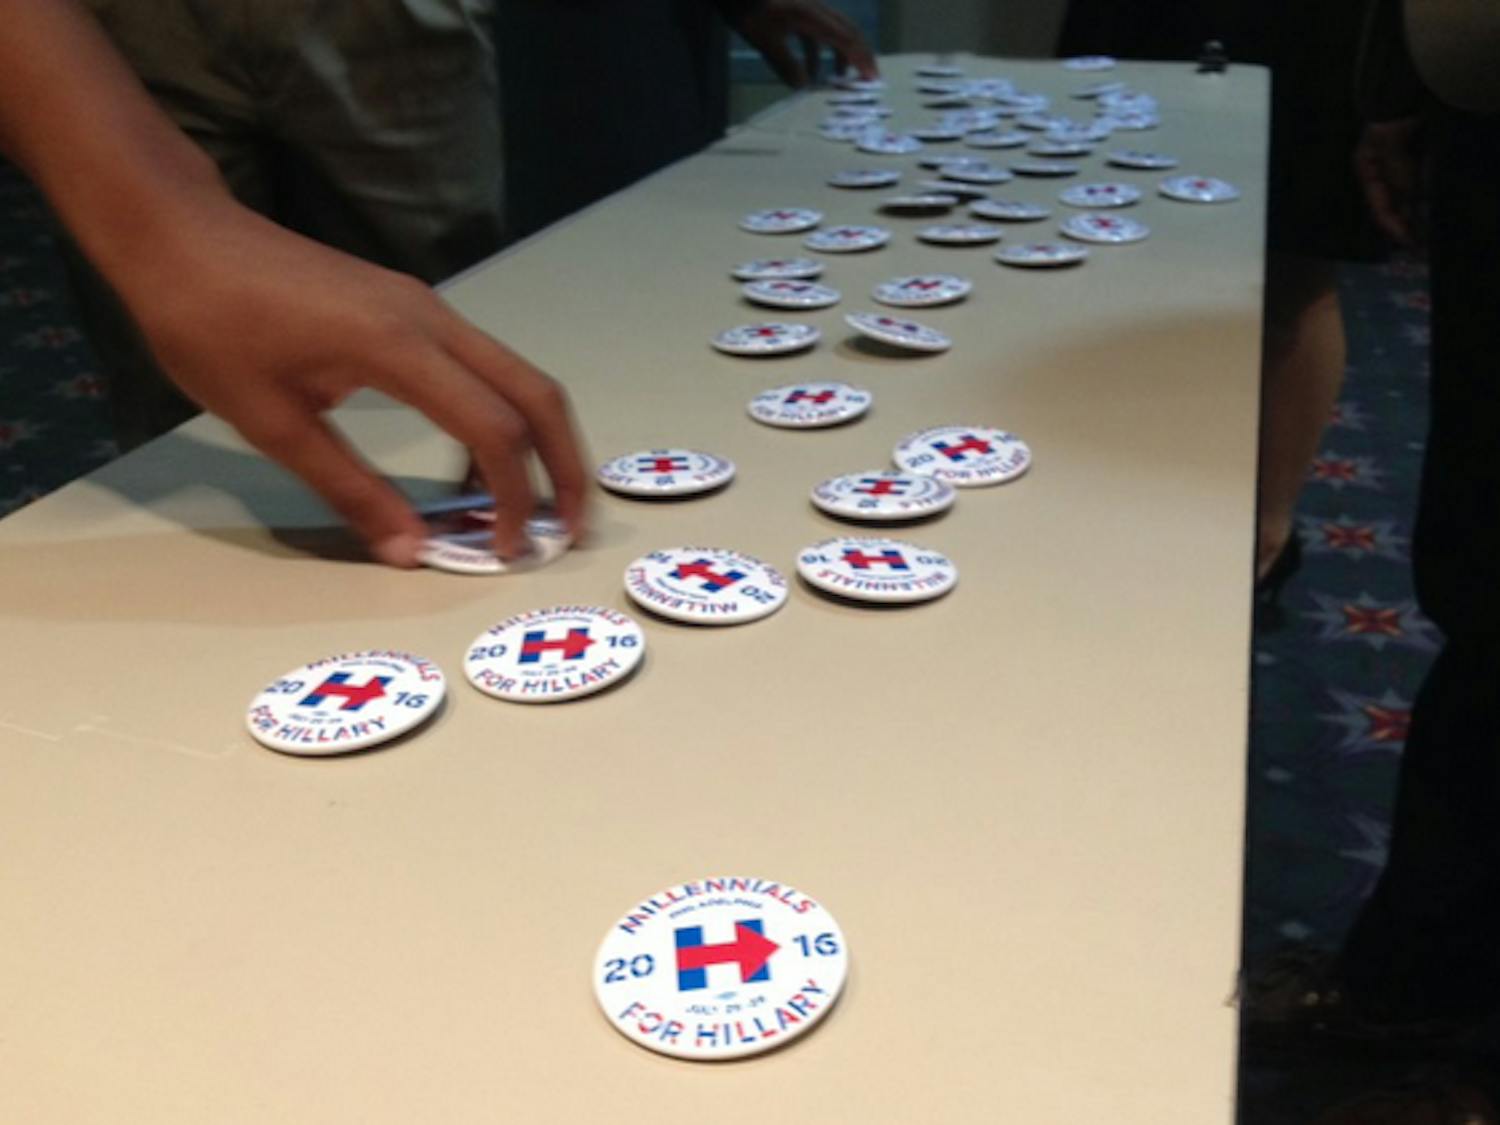 Delegates pick up Millennials for Hillary campaign buttons on their way into the youth council meeting at the Democratic National Convention in Philadelphia on July 27, 2016.